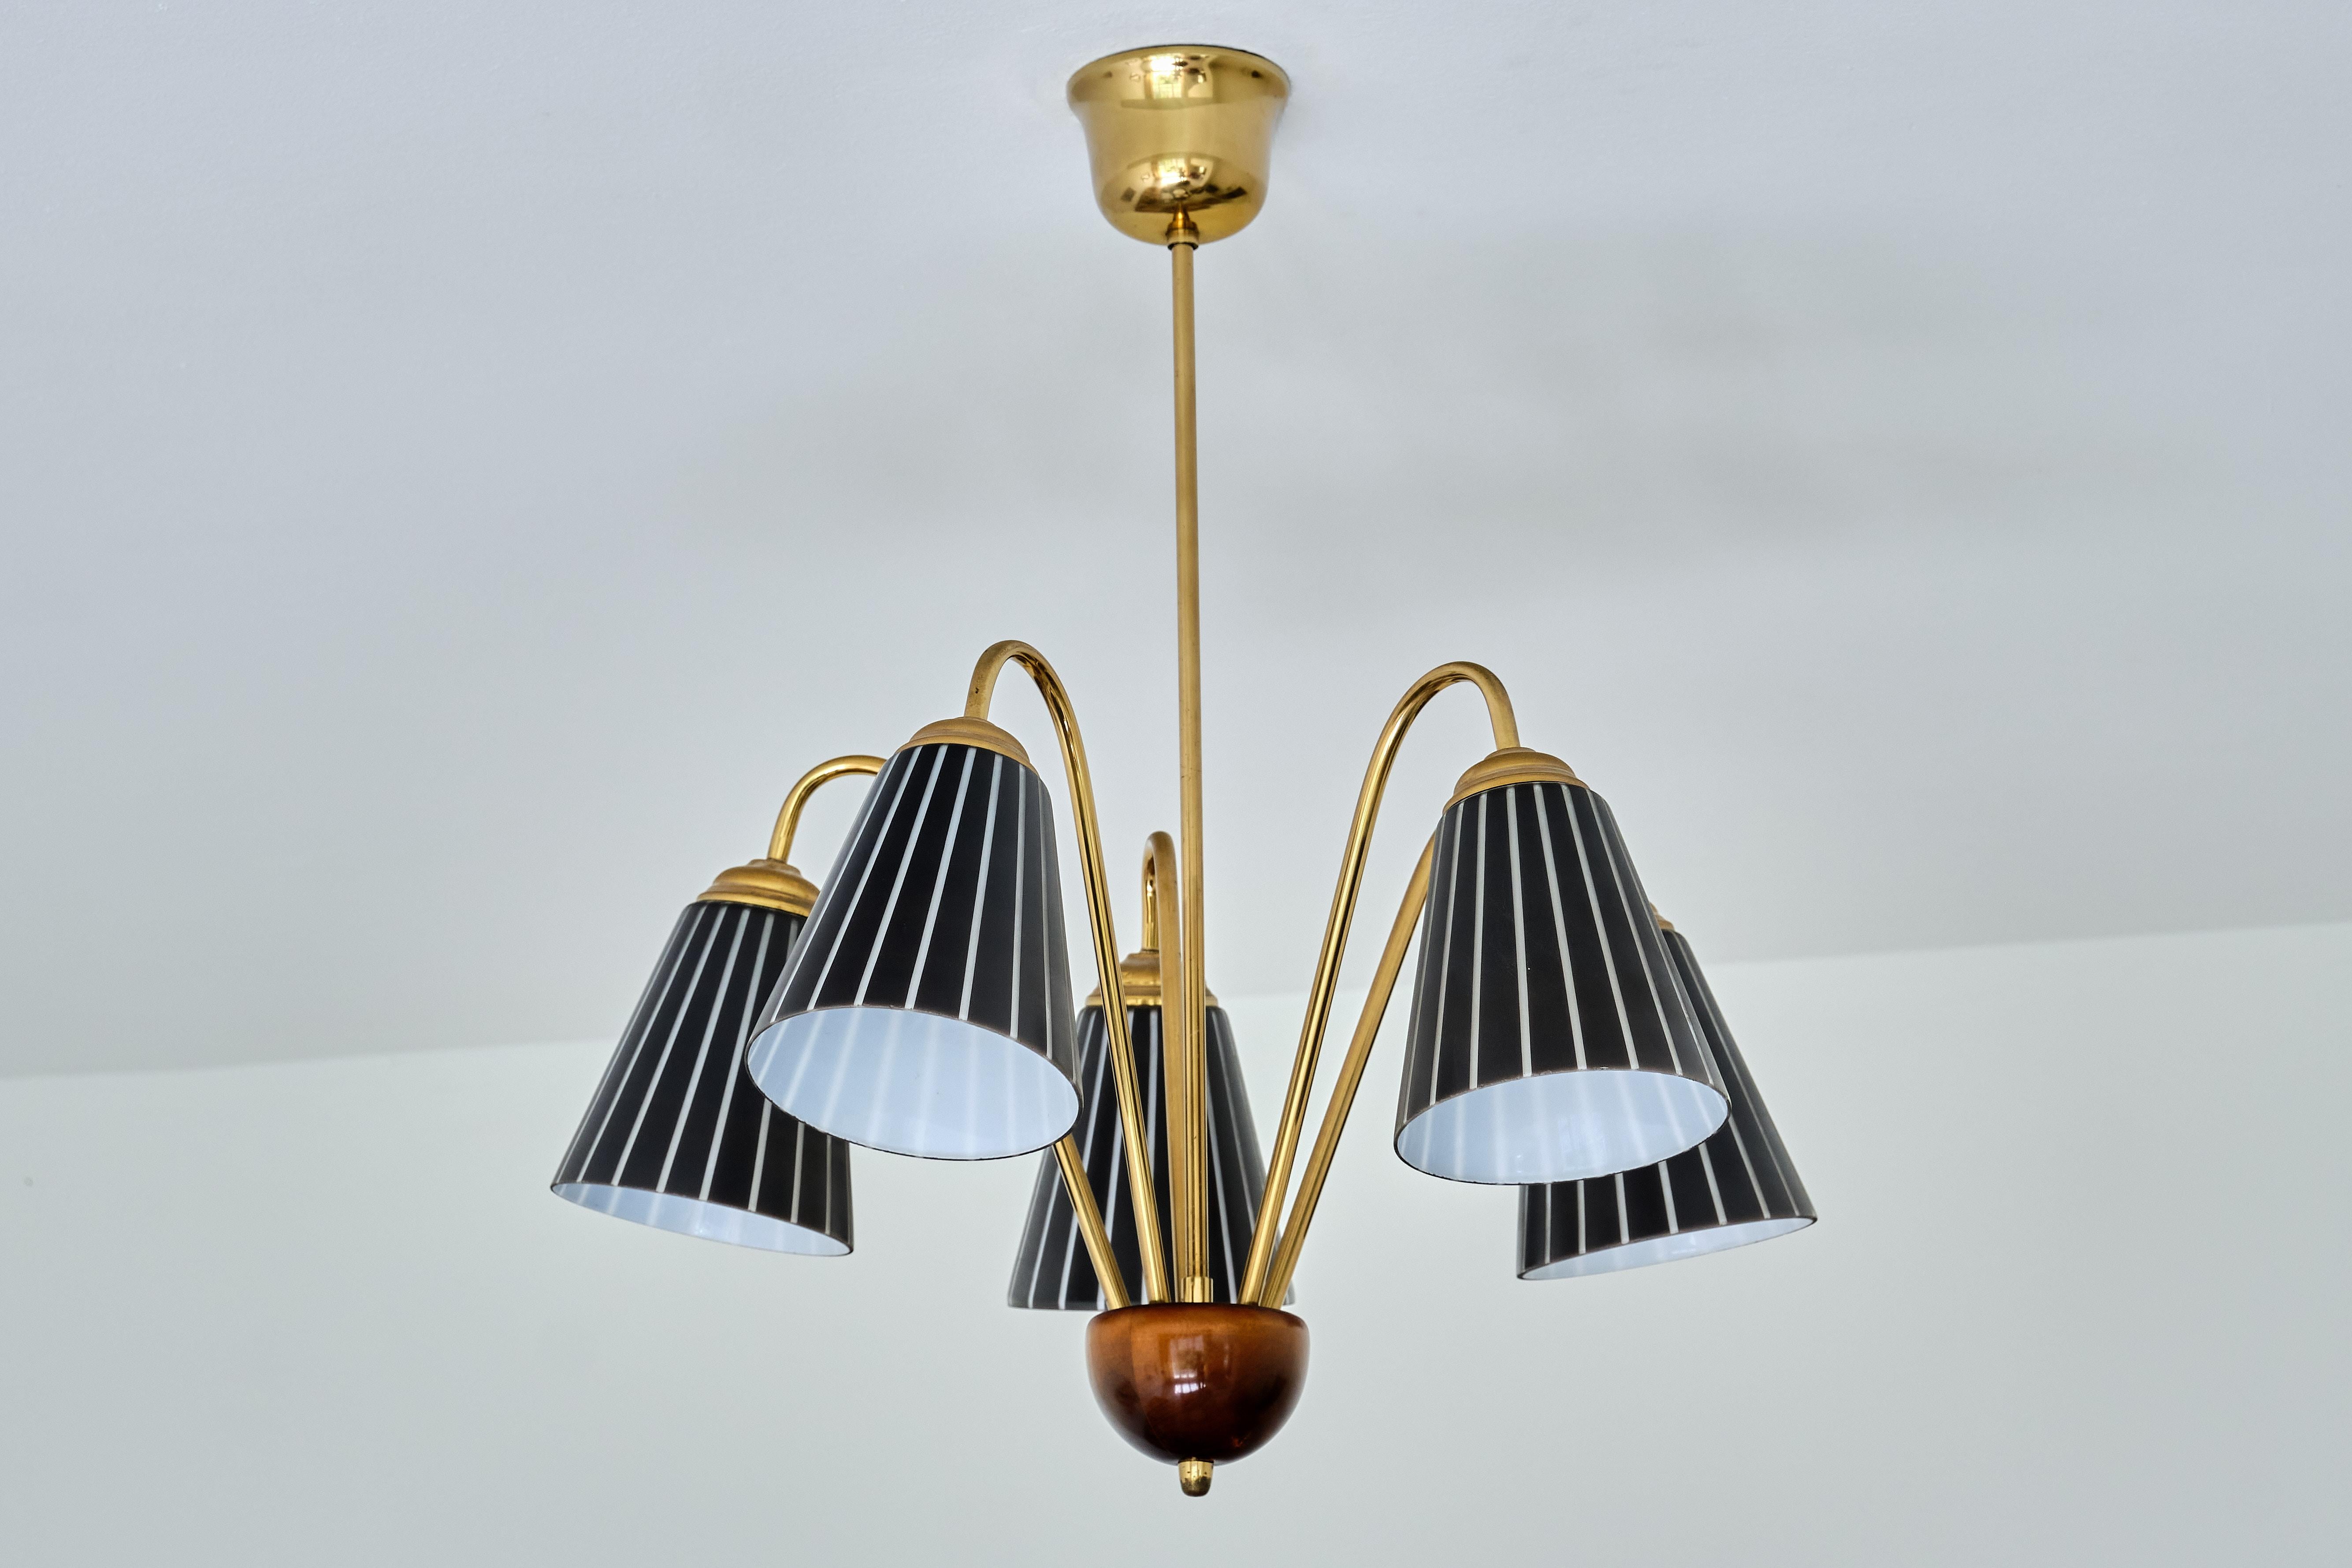 Mid-20th Century Nils Landberg Attributed Five Arm Chandelier in Striped Glass & Brass, Orrefors